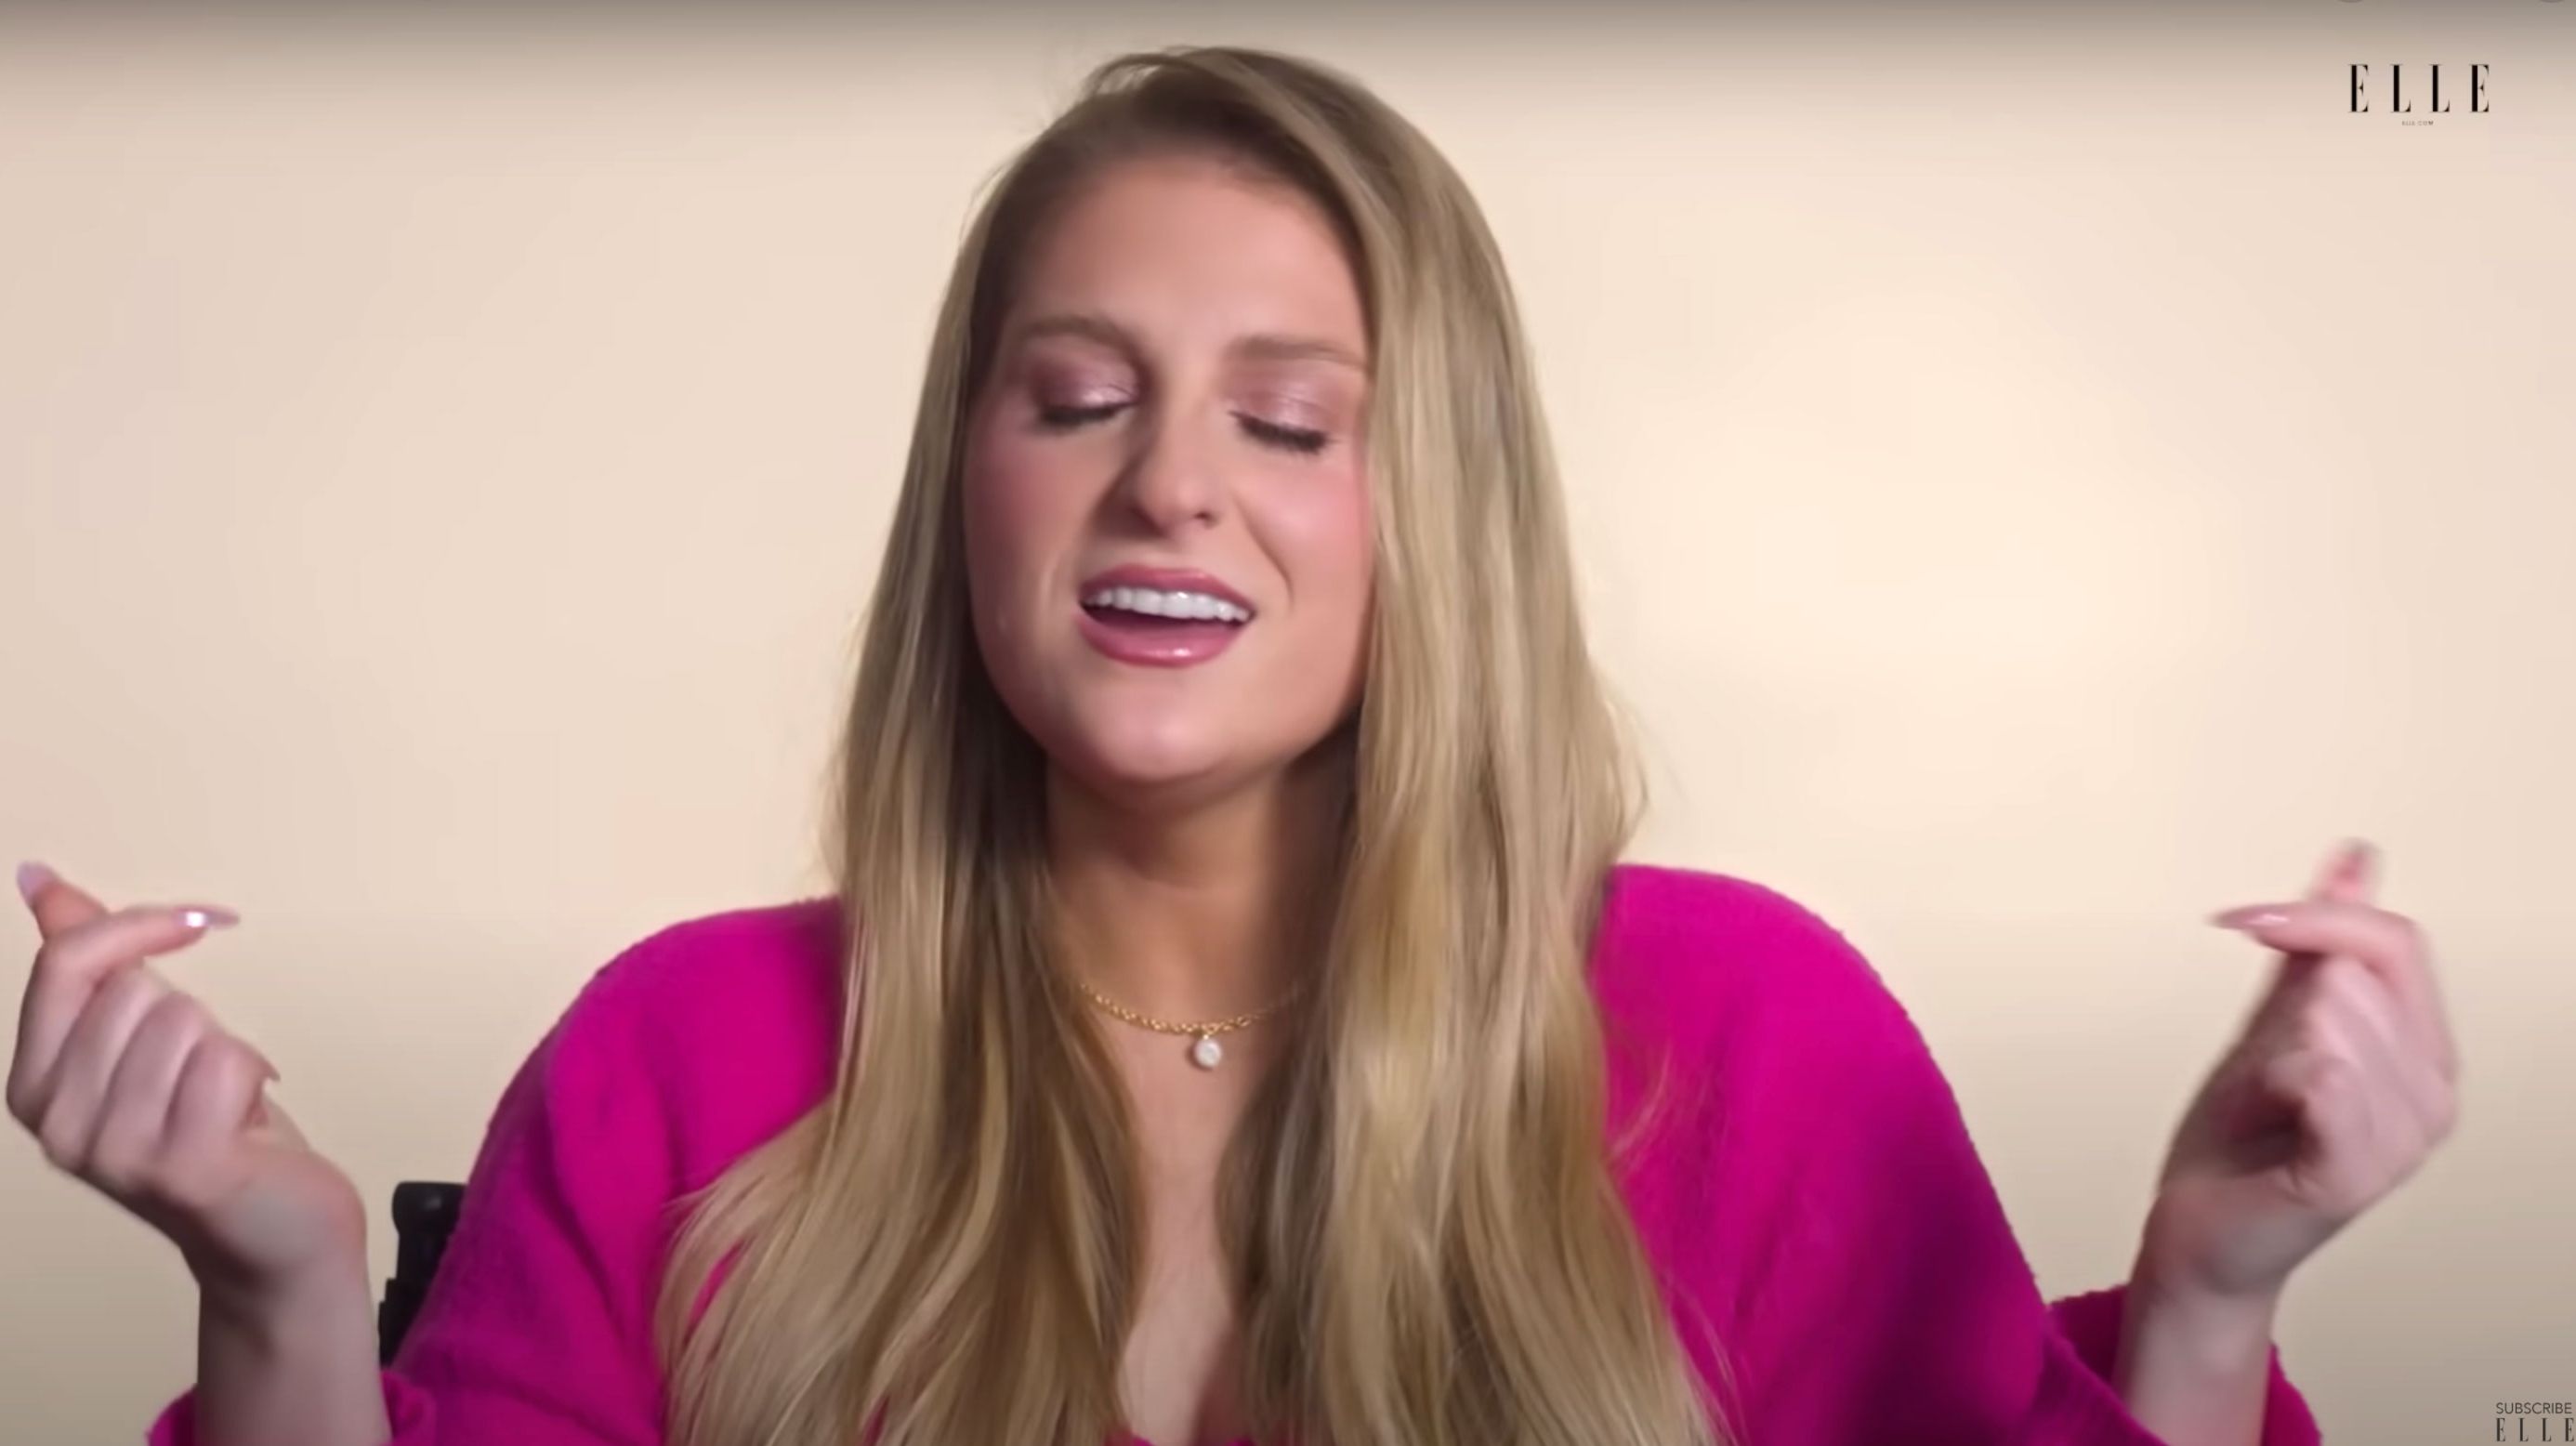 Meghan Trainor Has Panic Disorder — What That Means